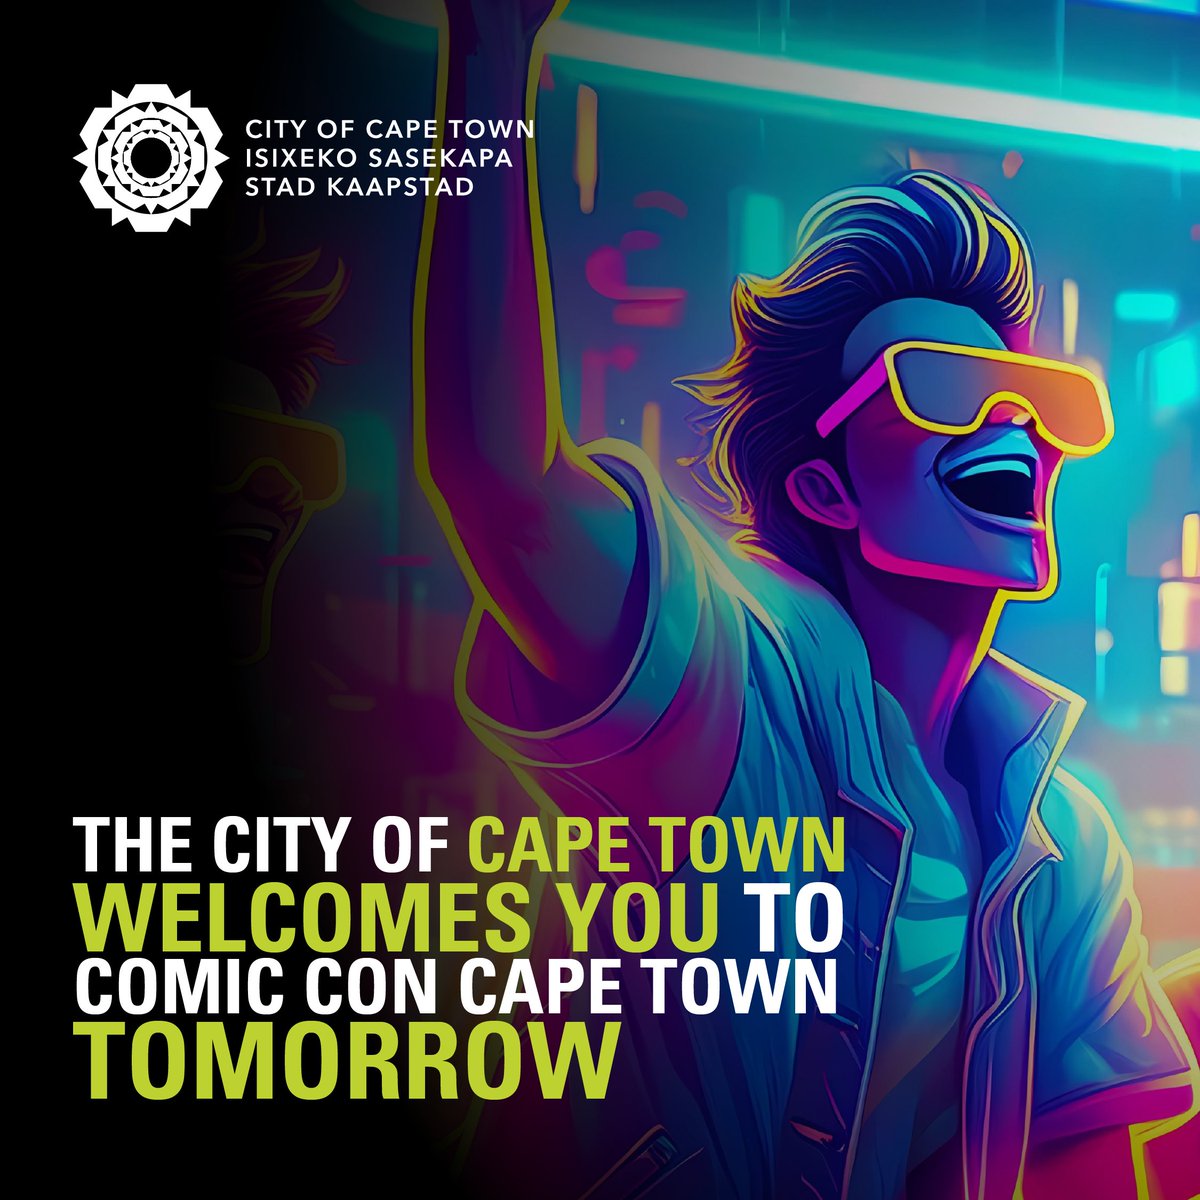 The @CityofCT welcomes you all to #ComicConCapeTown tomorrow! The stage is set and we are READY to geek out 🥳